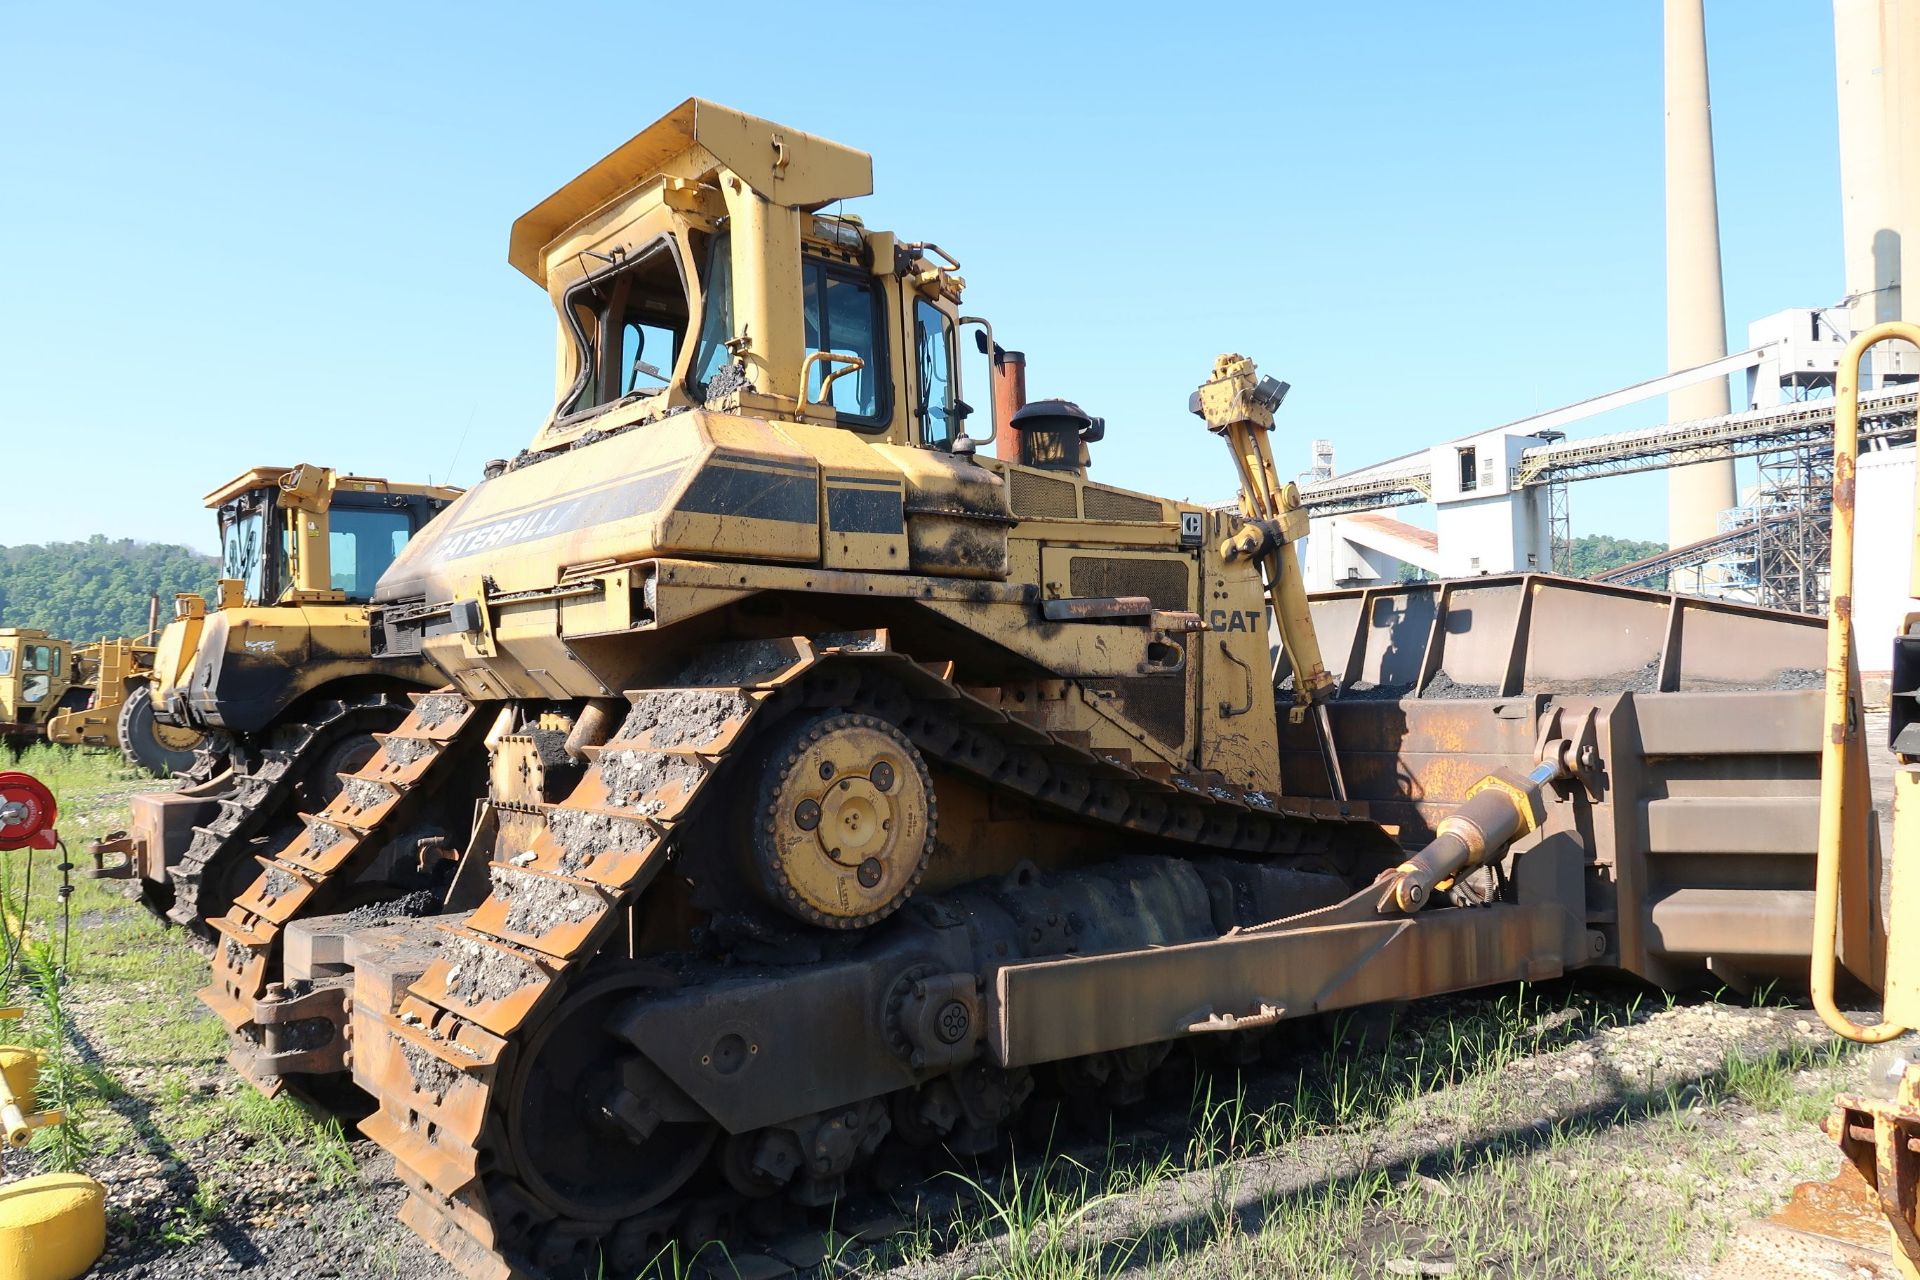 CATERPILLAR MODEL D9N CRAWLER DOZER; S/N 1JD02281, ROPS CANOPY, CAB, 26,102 HOURS SHOWING, NOTED - Image 3 of 11